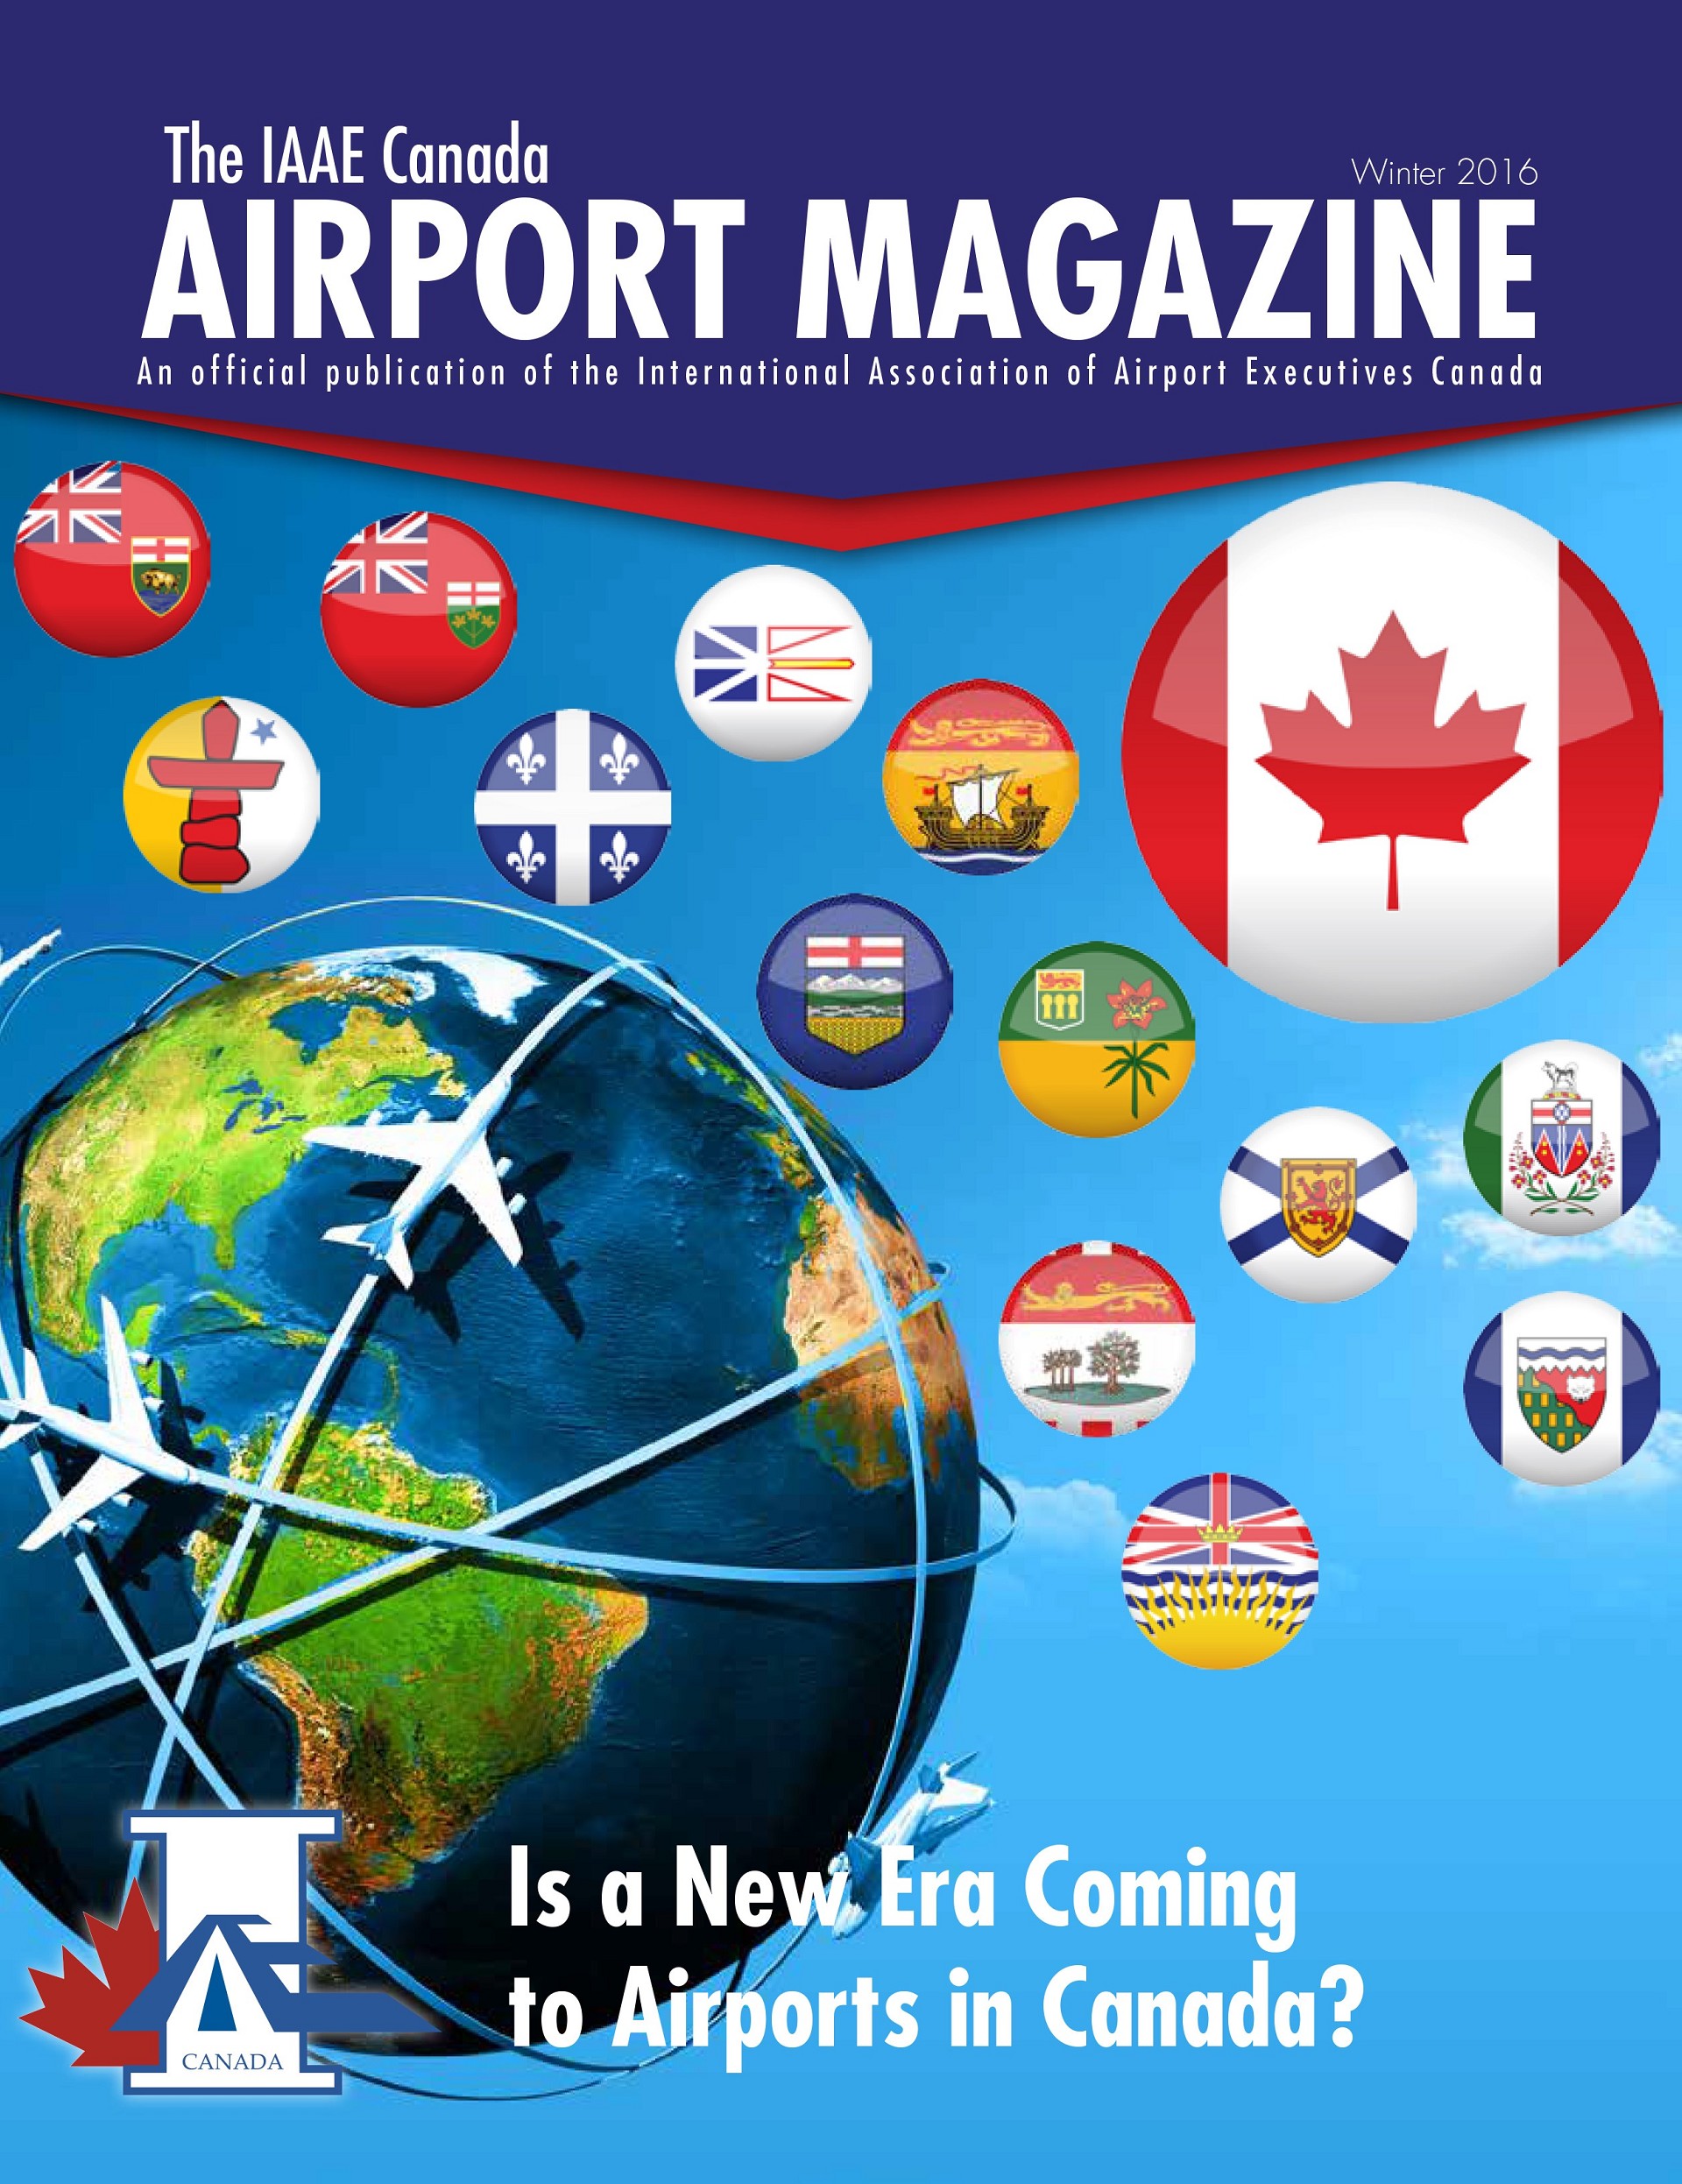 winter 2016, is a new era coming to airports in canada?